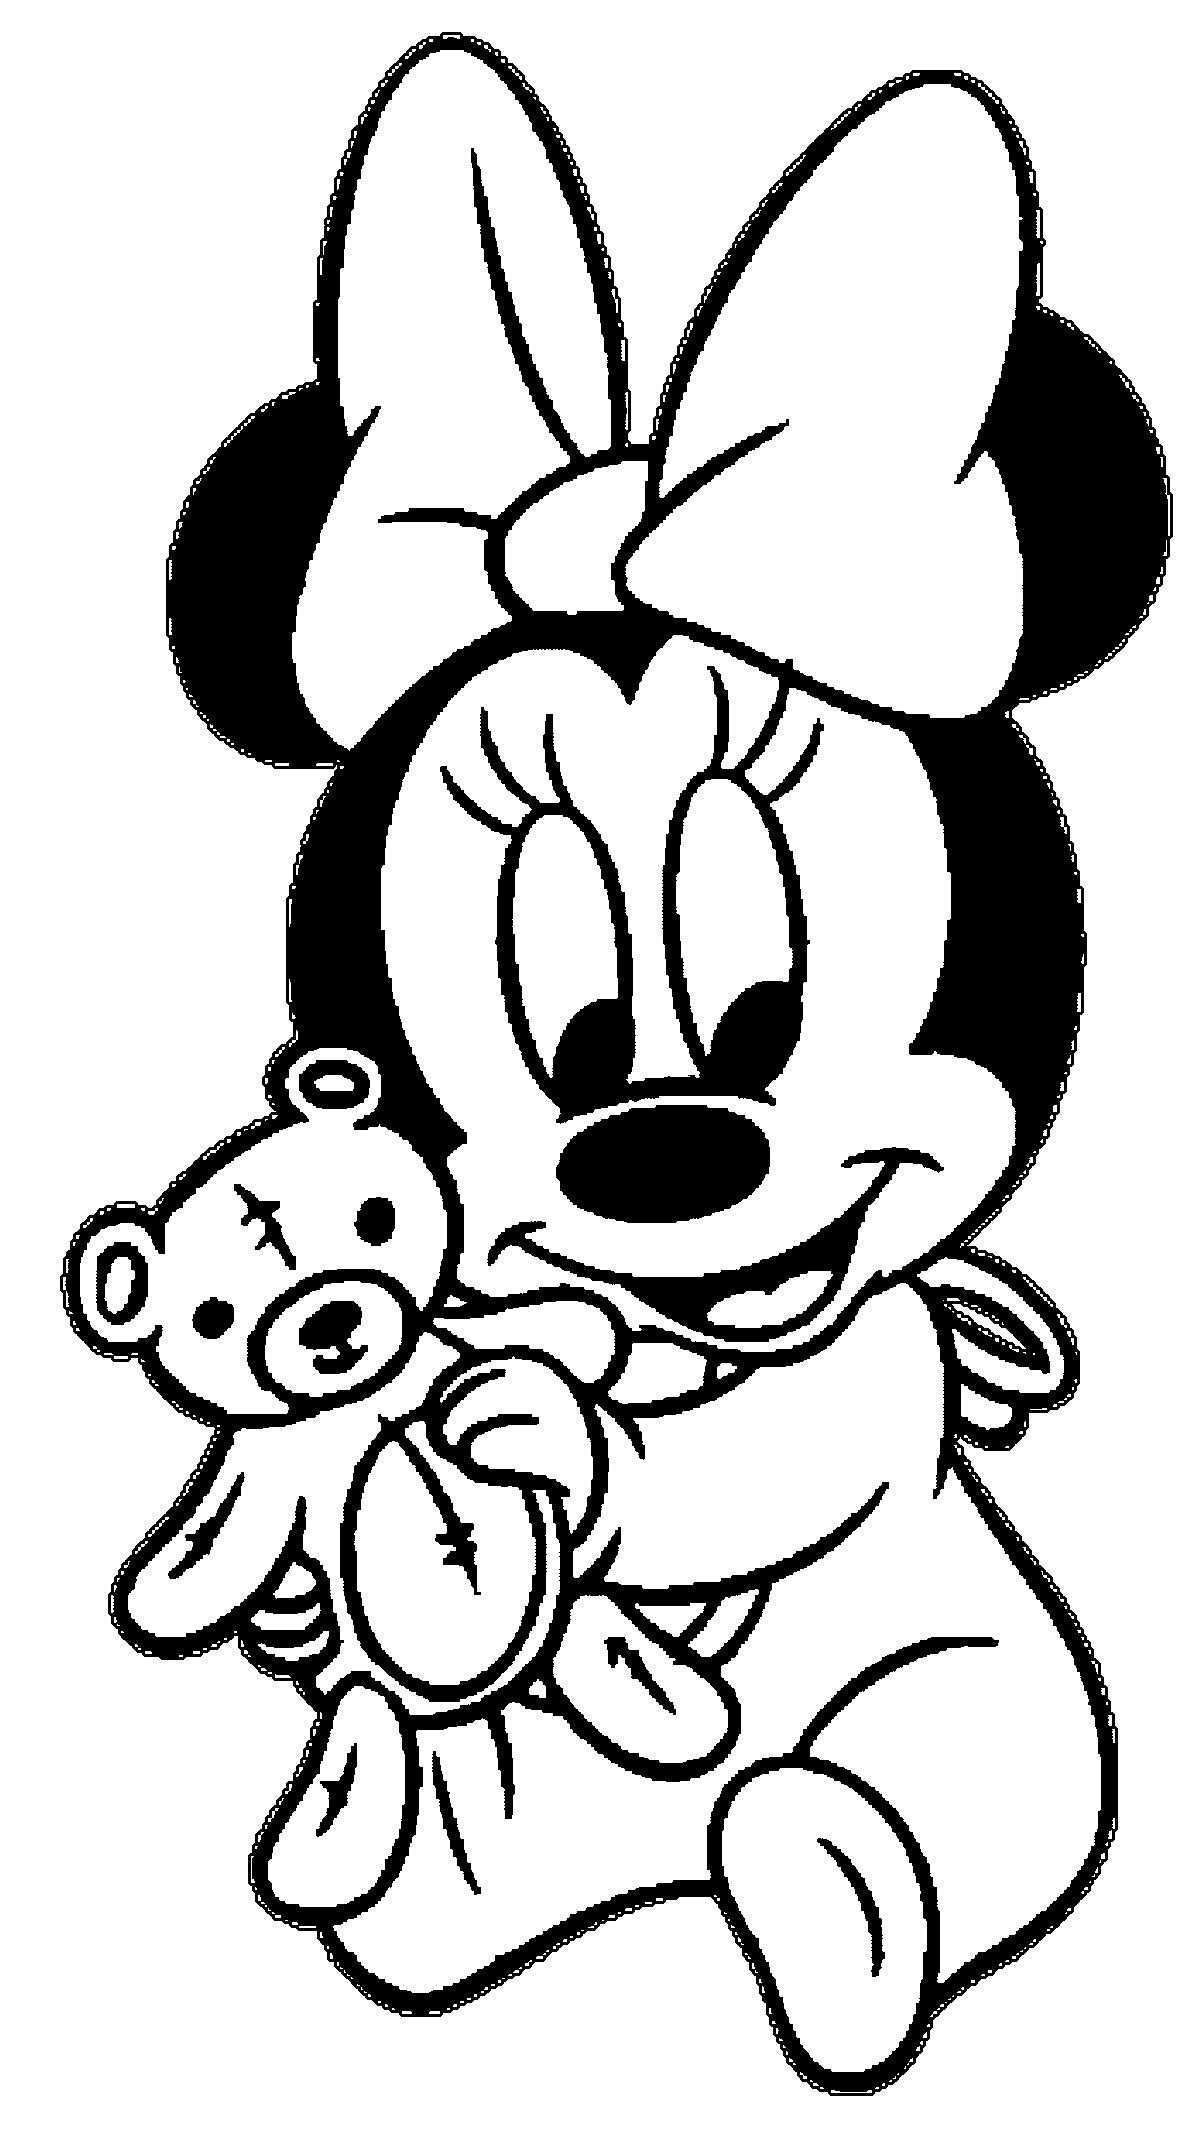 Minnie Baby Coloring Pages 2 By Sean Mickey Mouse Coloring Pages Minnie Mouse Colorin